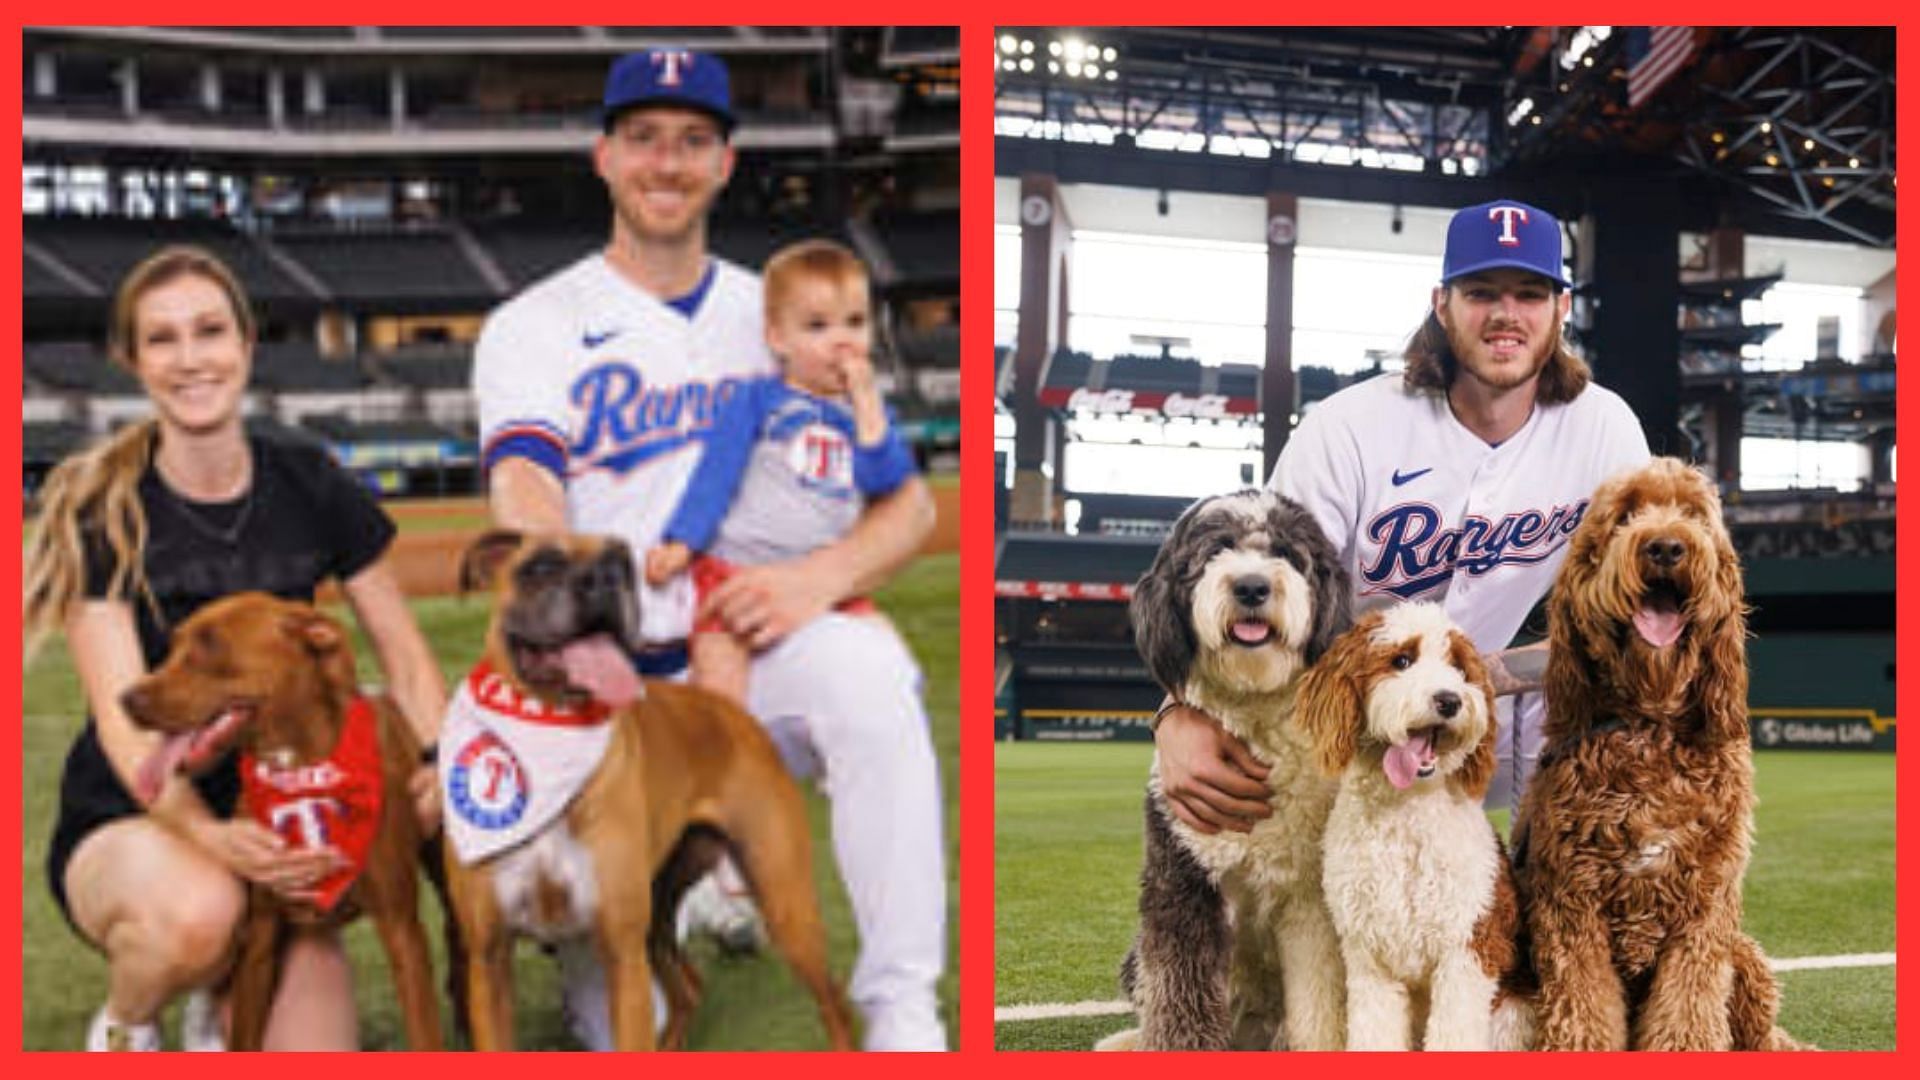 Jon Gray: MLB pitcher Jon Gray and wife Jacklyn rescue Texas Rangers Pet  Calendar to aid dogs in need